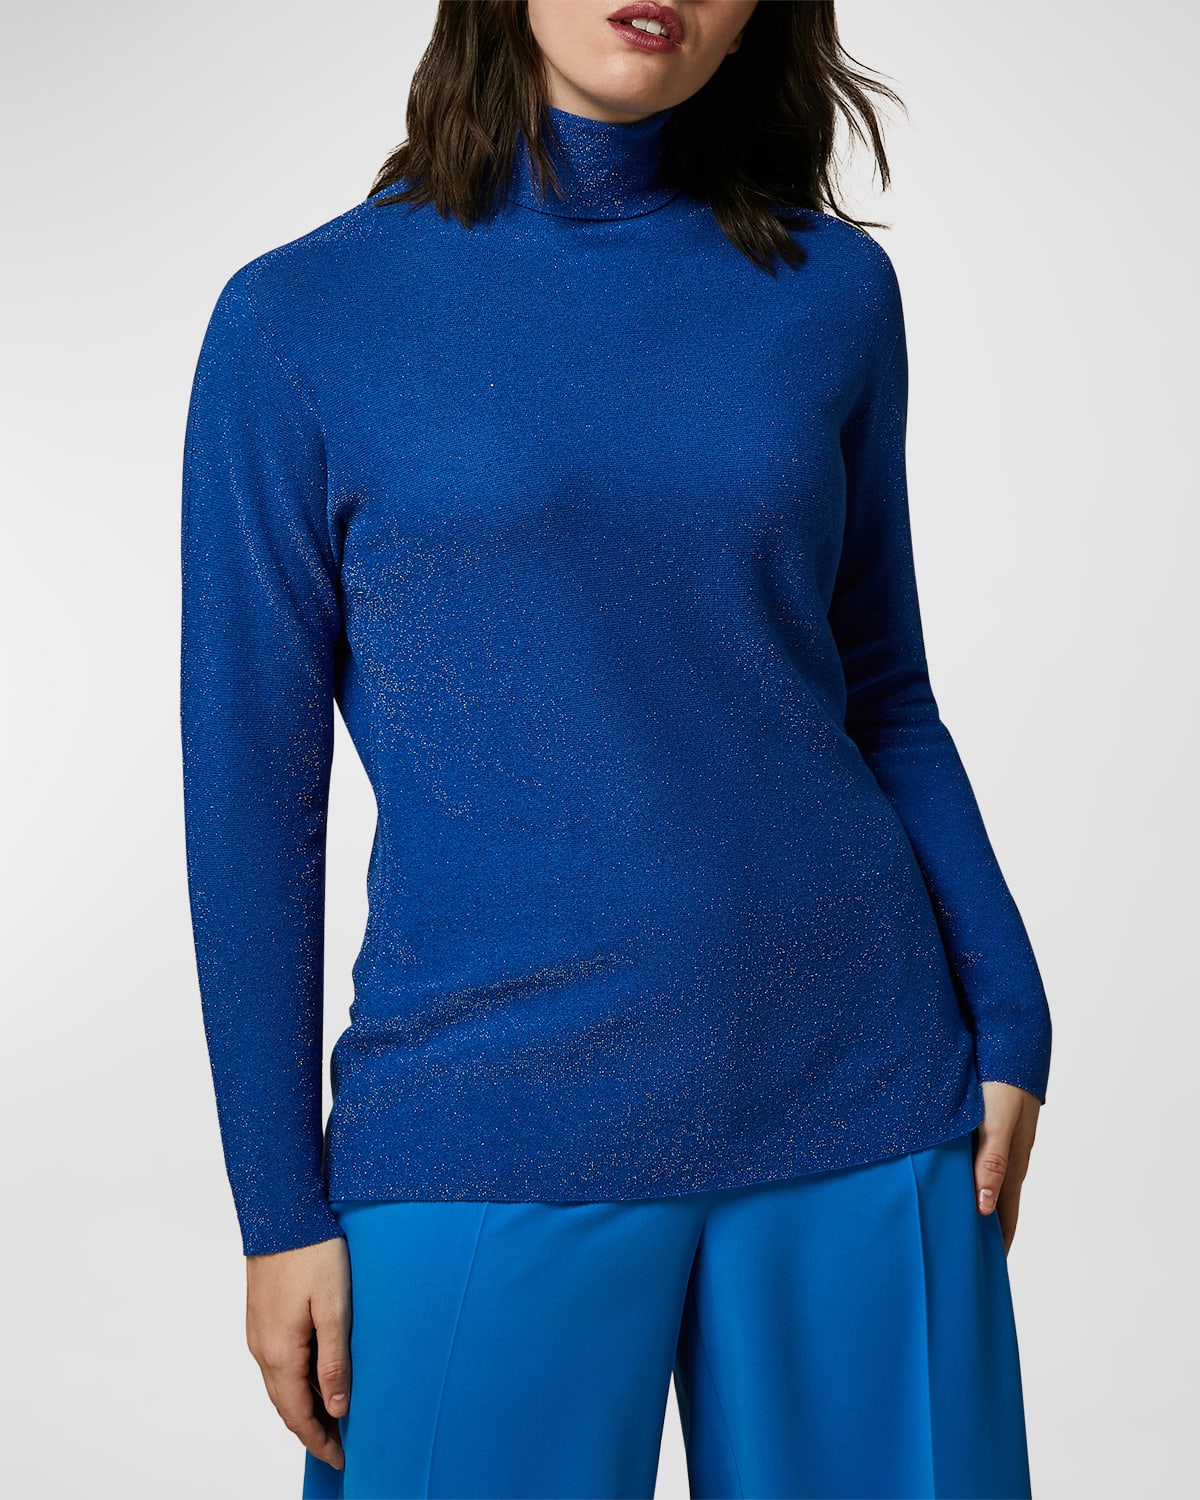 Plus Size Cosa Shimmer-Knit Turtleneck Sweater